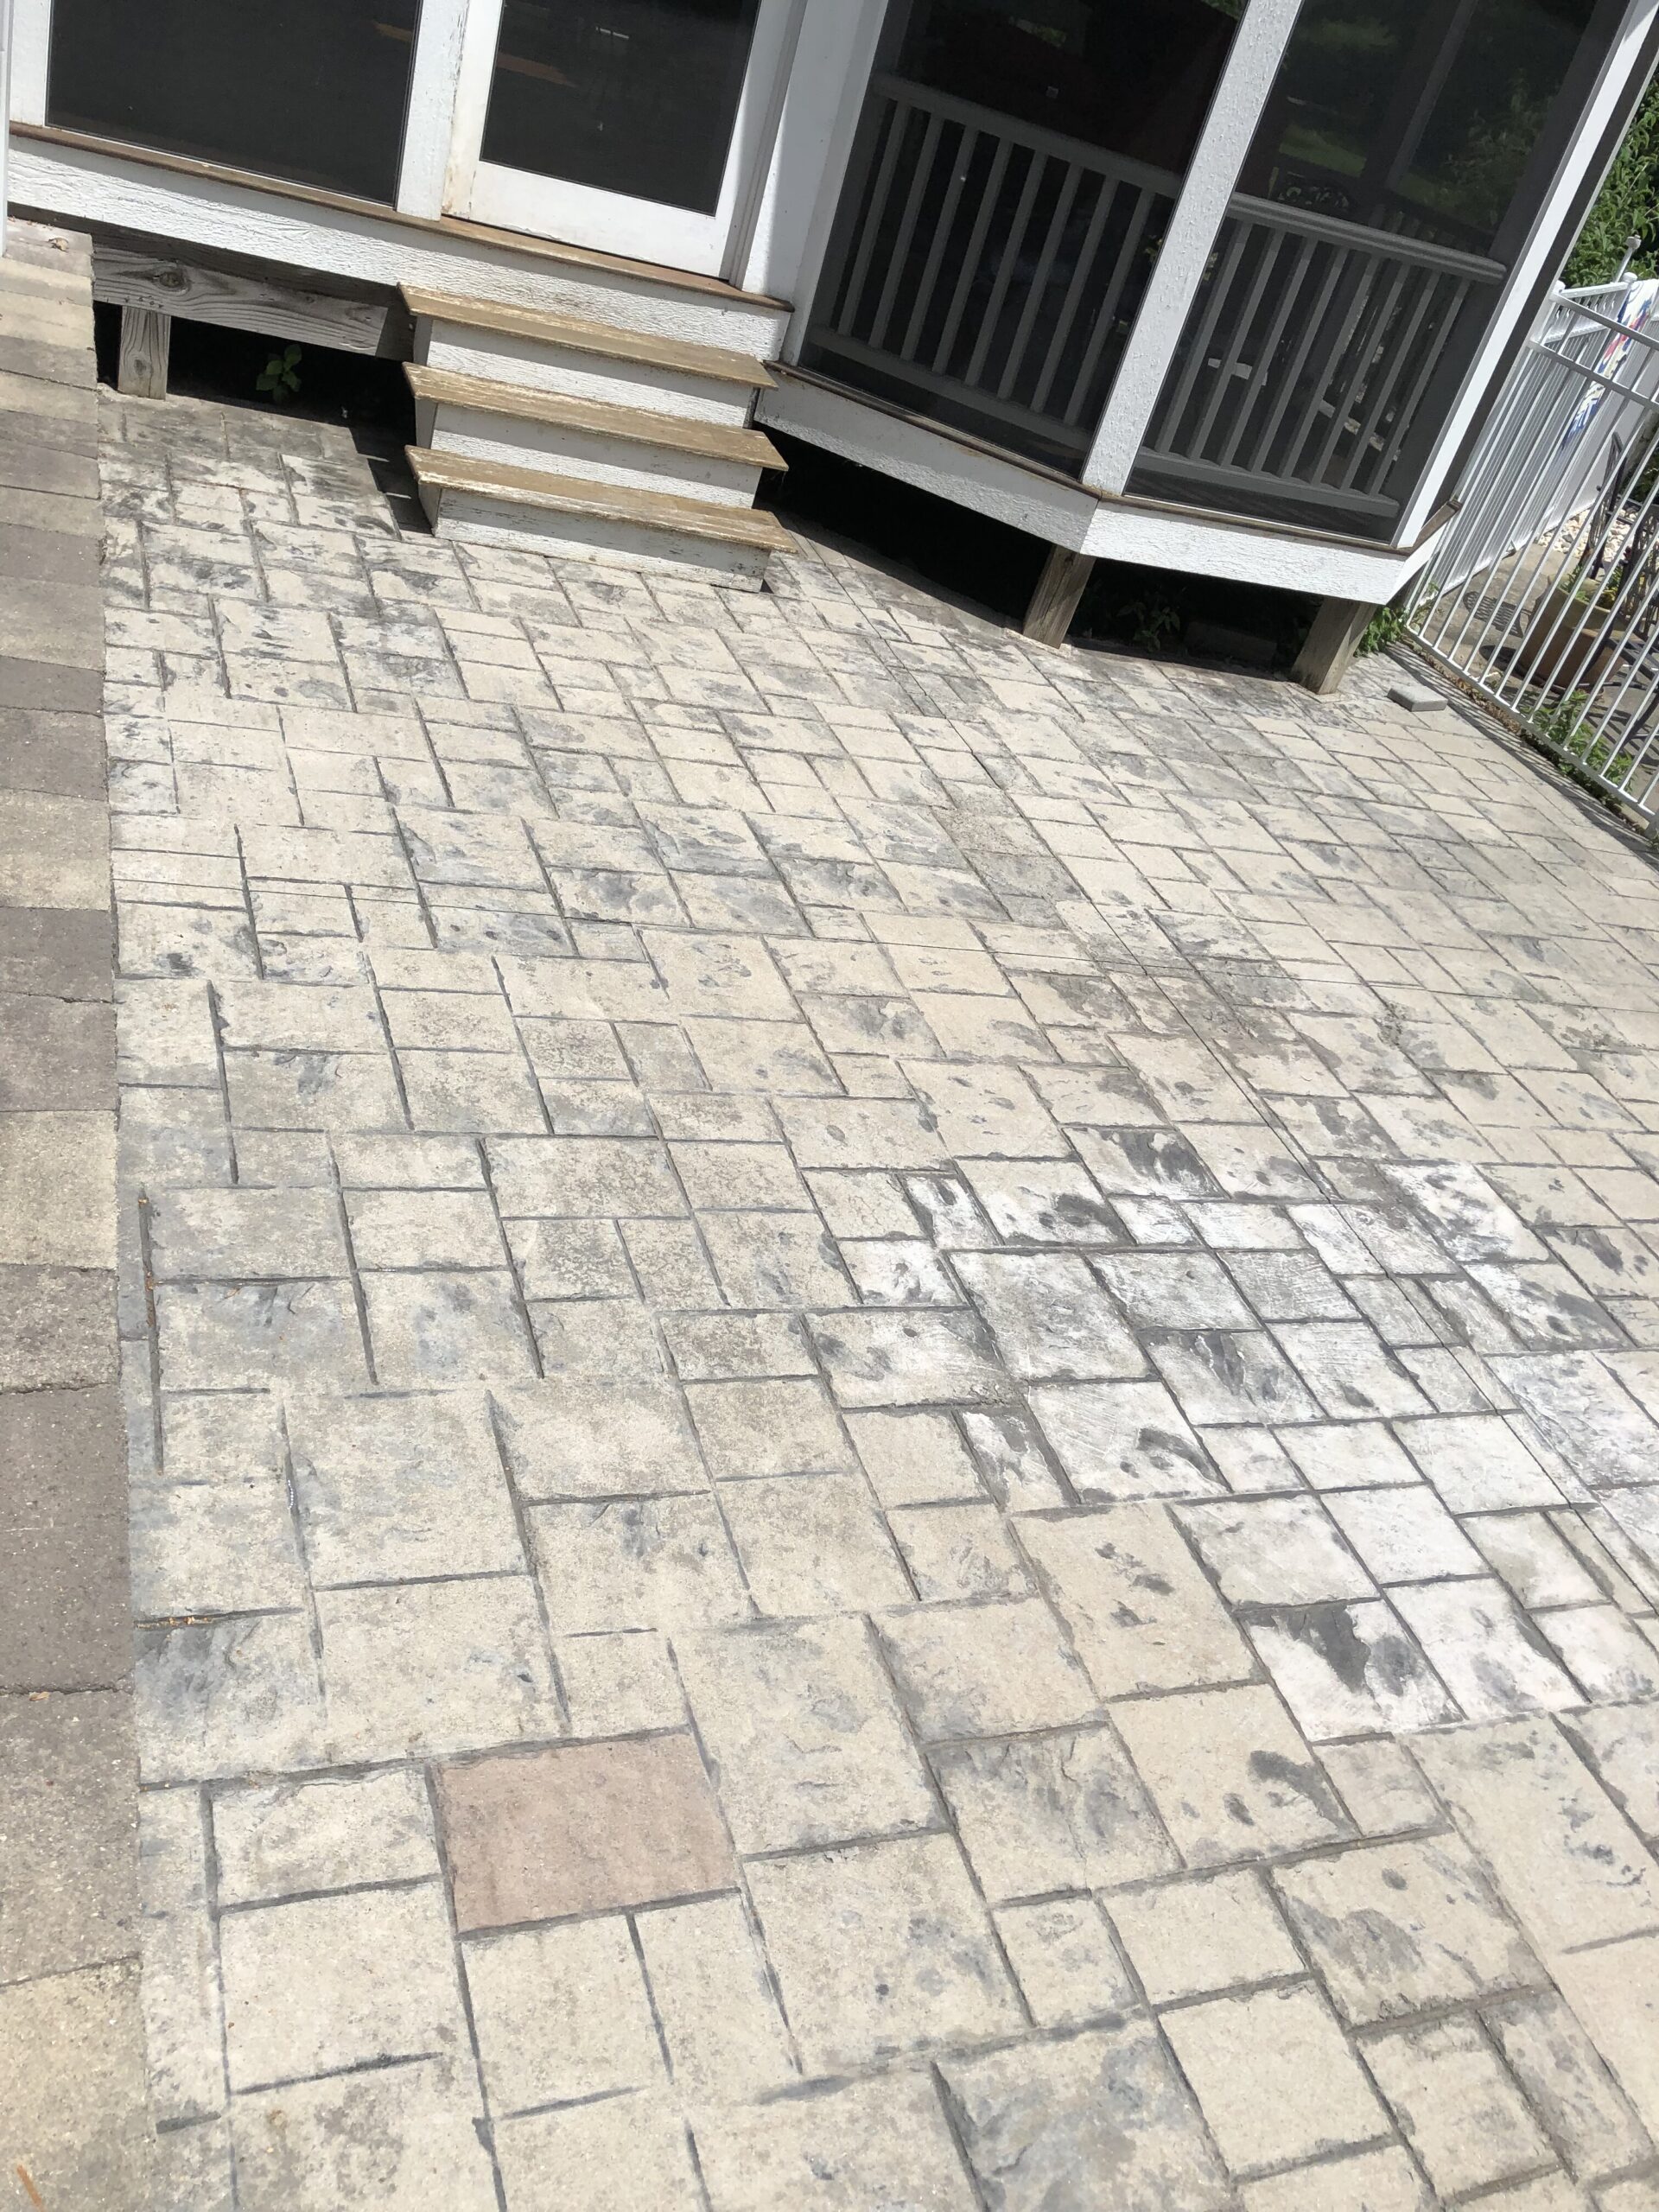 Faded and discolored stamped concrete patio